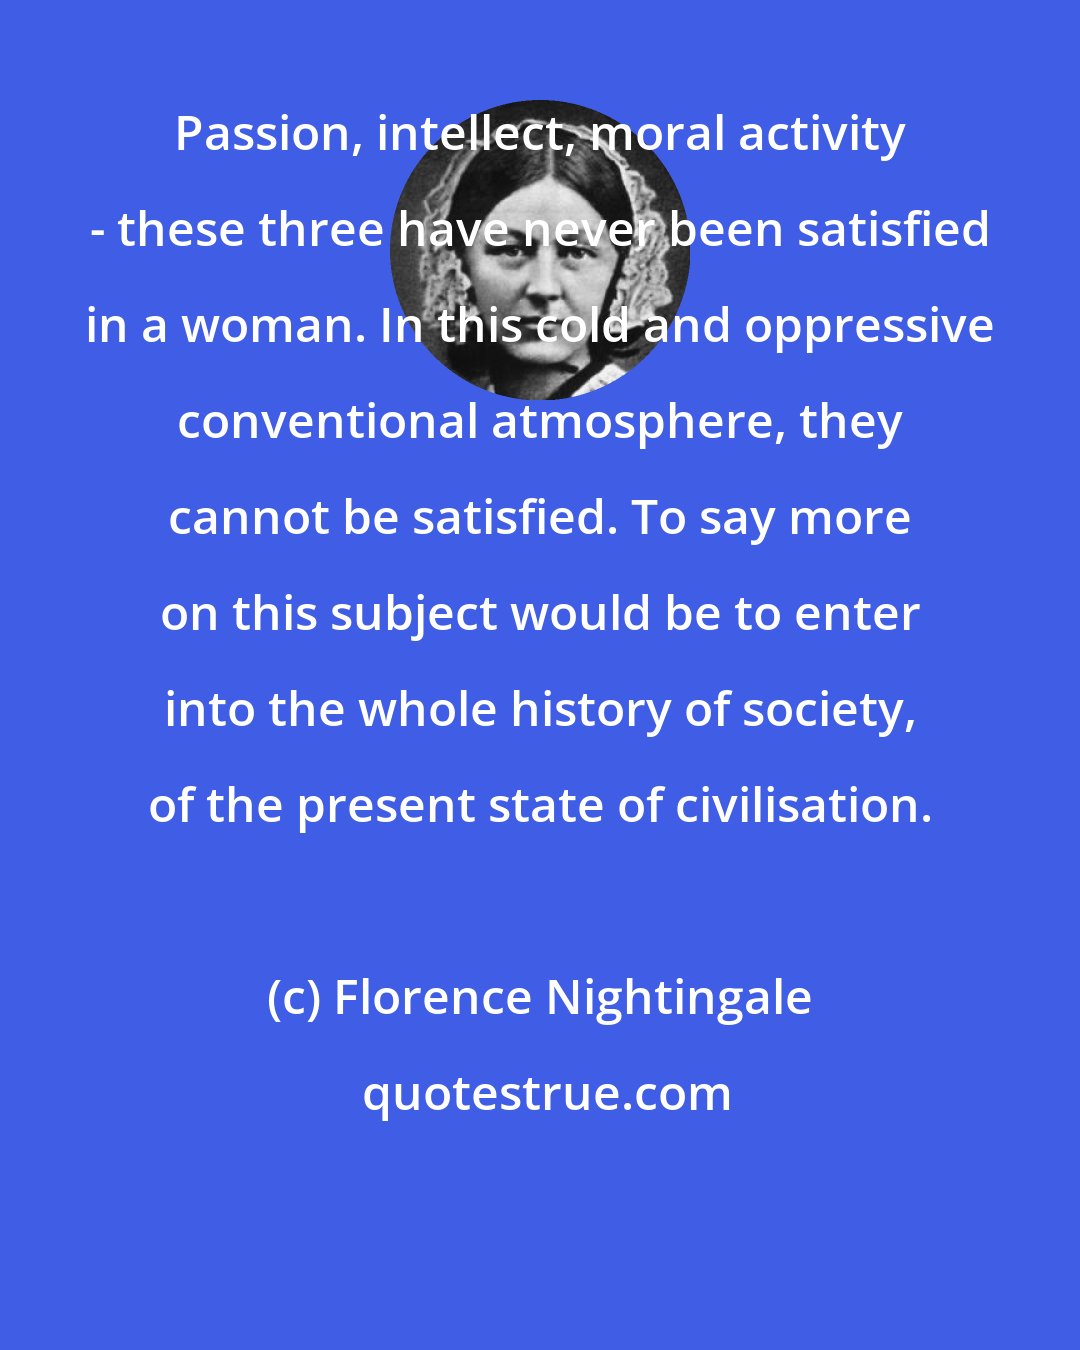 Florence Nightingale: Passion, intellect, moral activity - these three have never been satisfied in a woman. In this cold and oppressive conventional atmosphere, they cannot be satisfied. To say more on this subject would be to enter into the whole history of society, of the present state of civilisation.